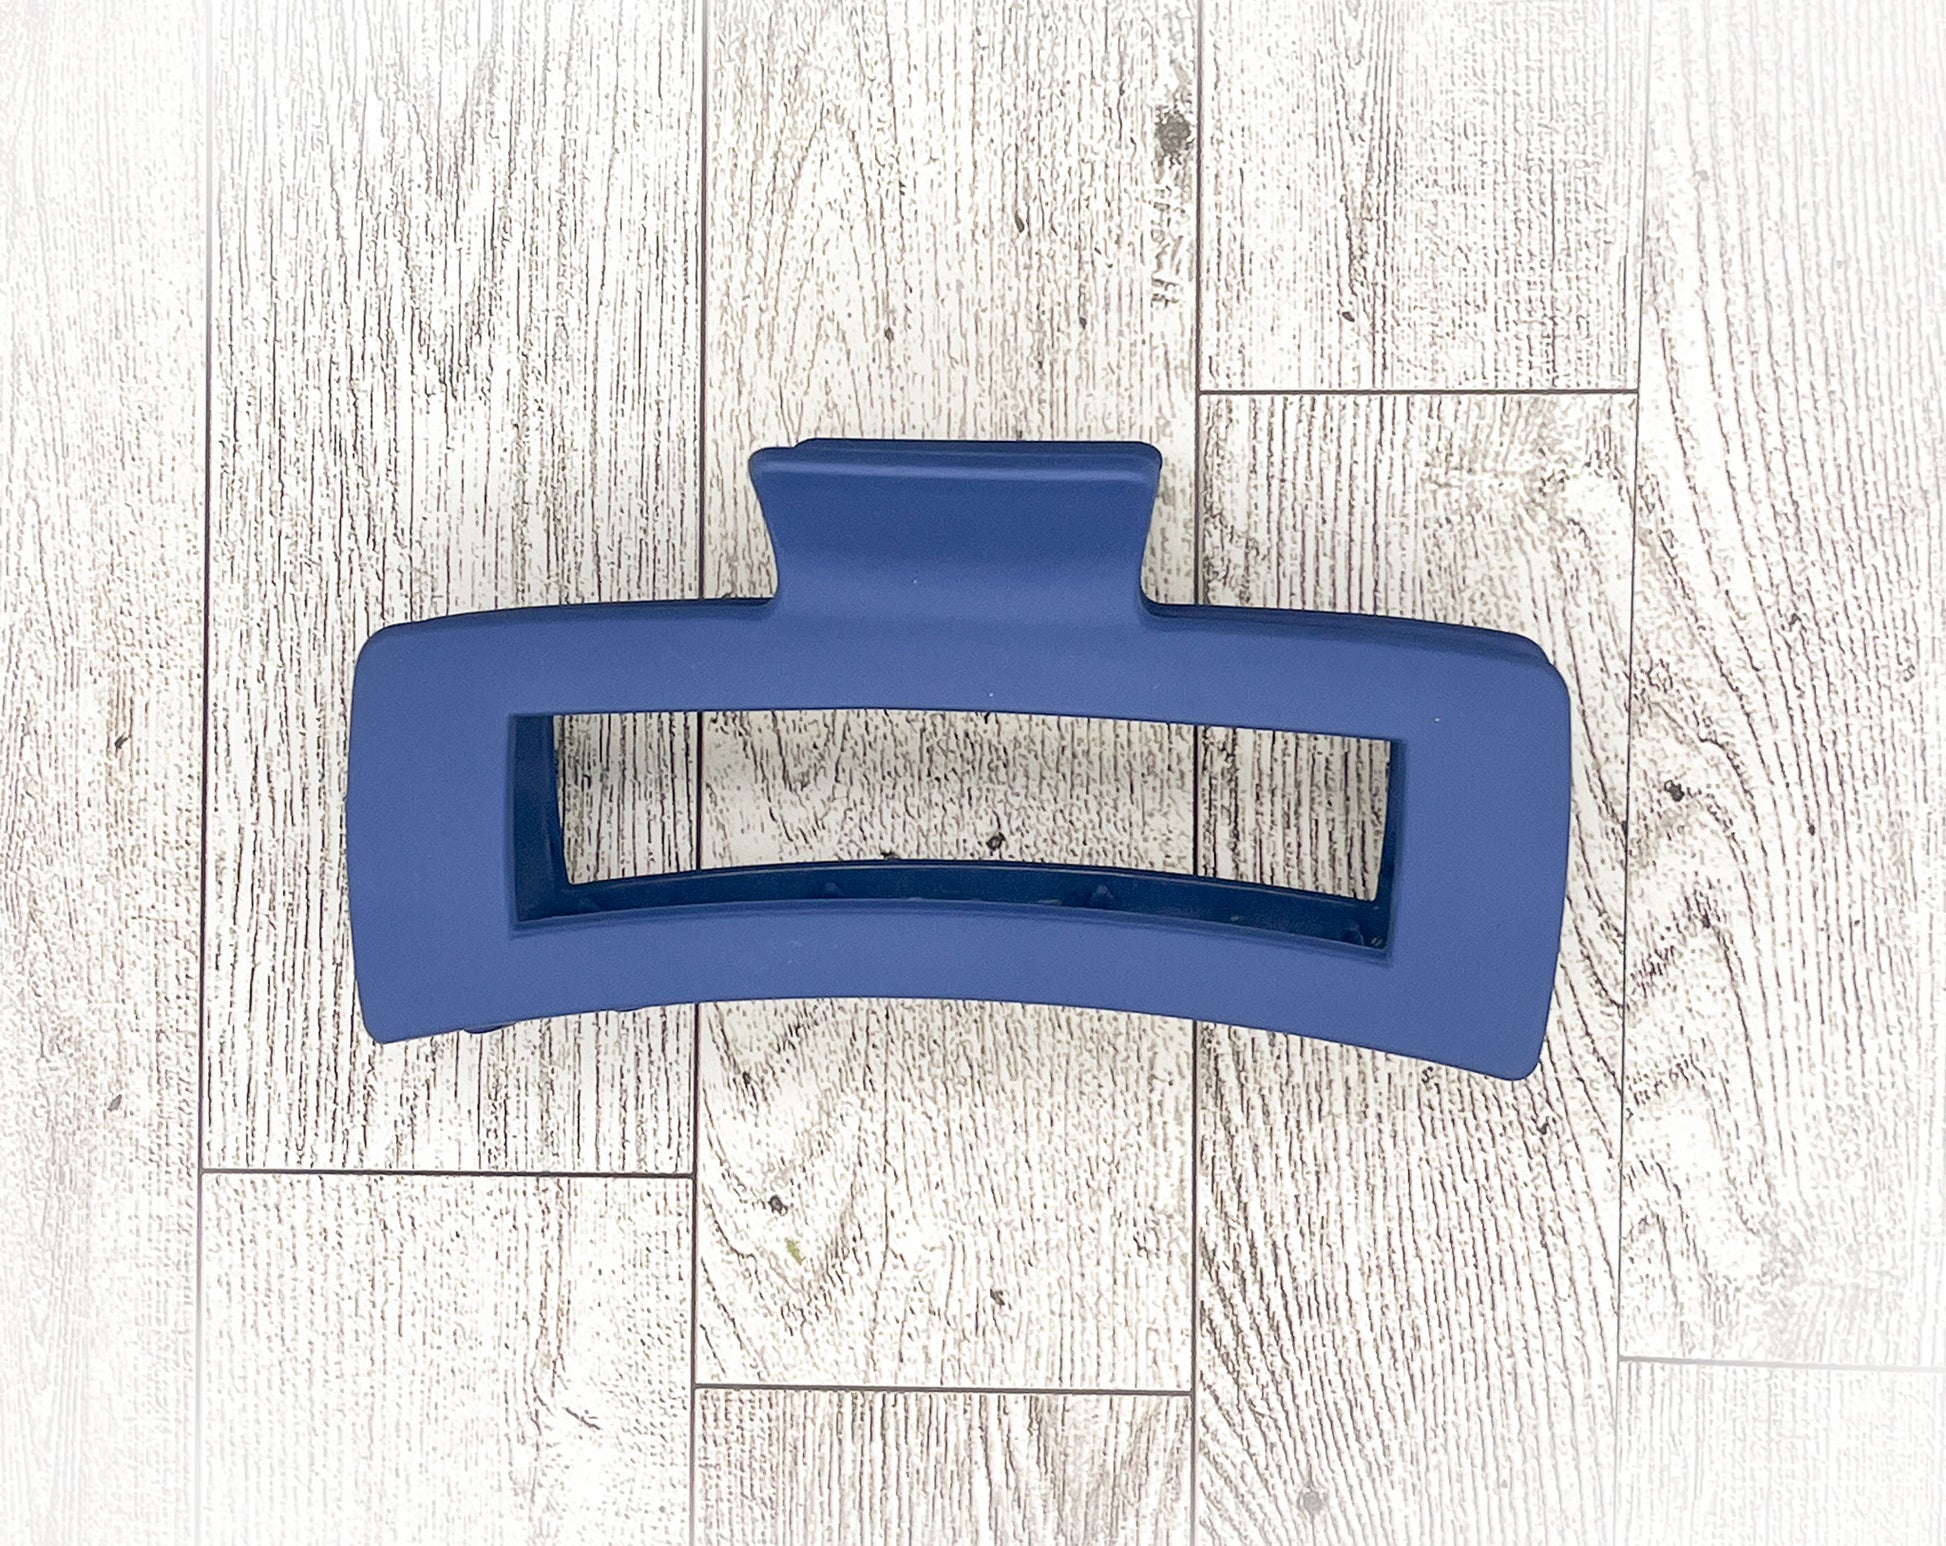 Matte Navy Blue Hair Claw Clip - Rectangular - 5 inches in length. Great for Braids, twists, long hair, thick hair, and coarse hair.